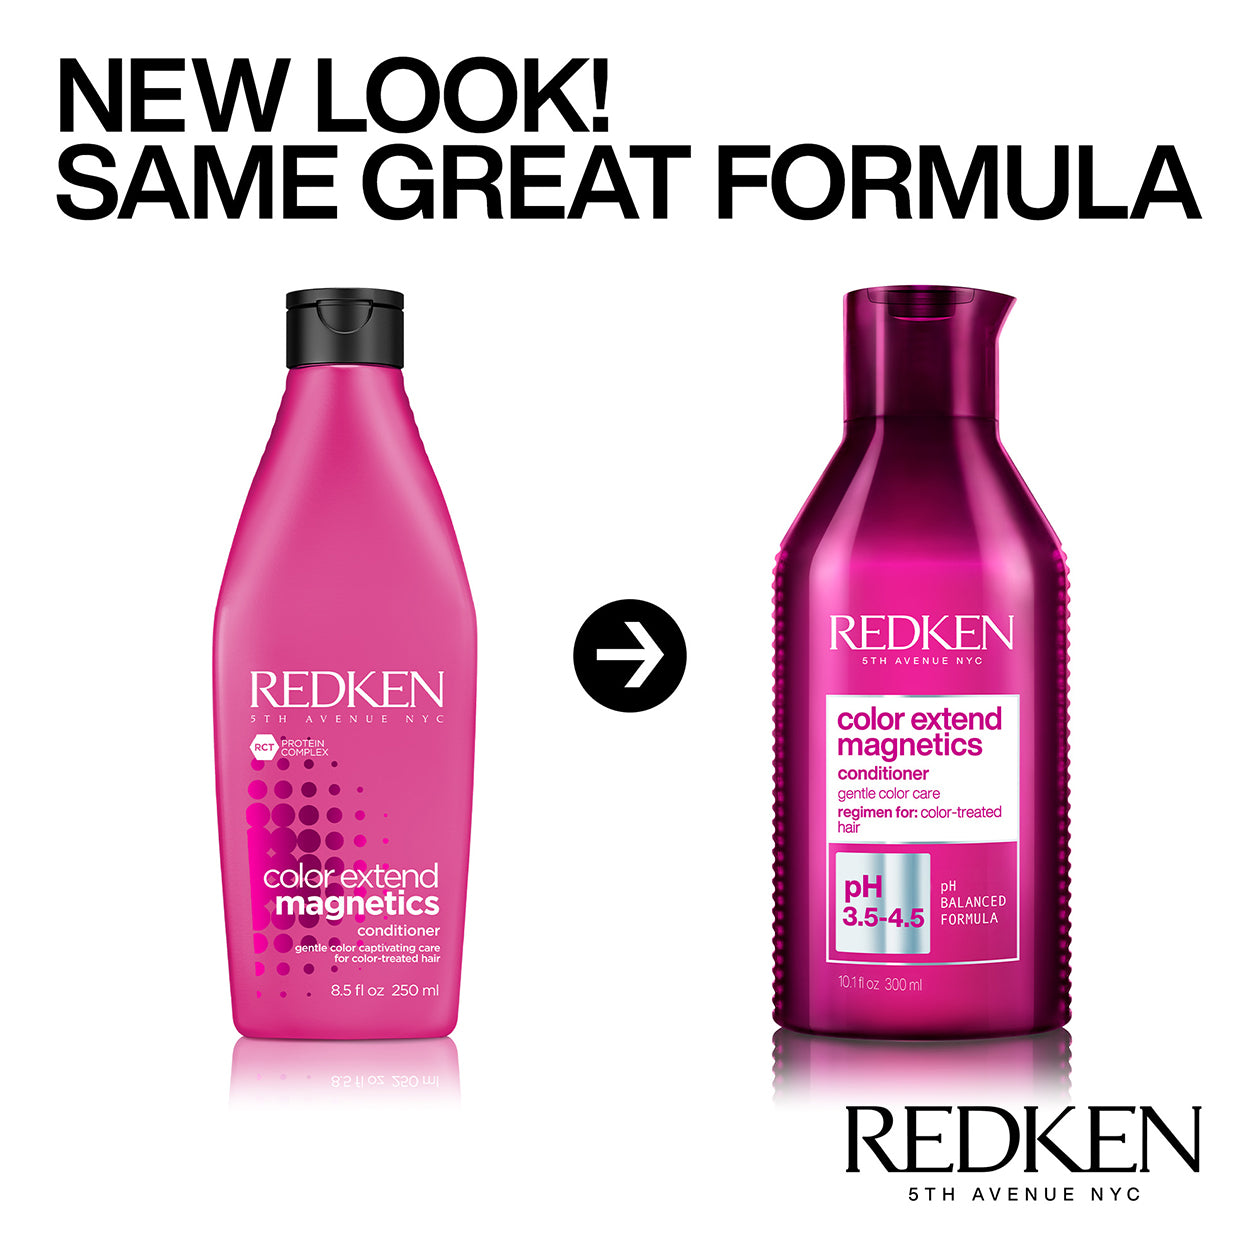 Redken Color Extend Magnetic Conditioner Packaging